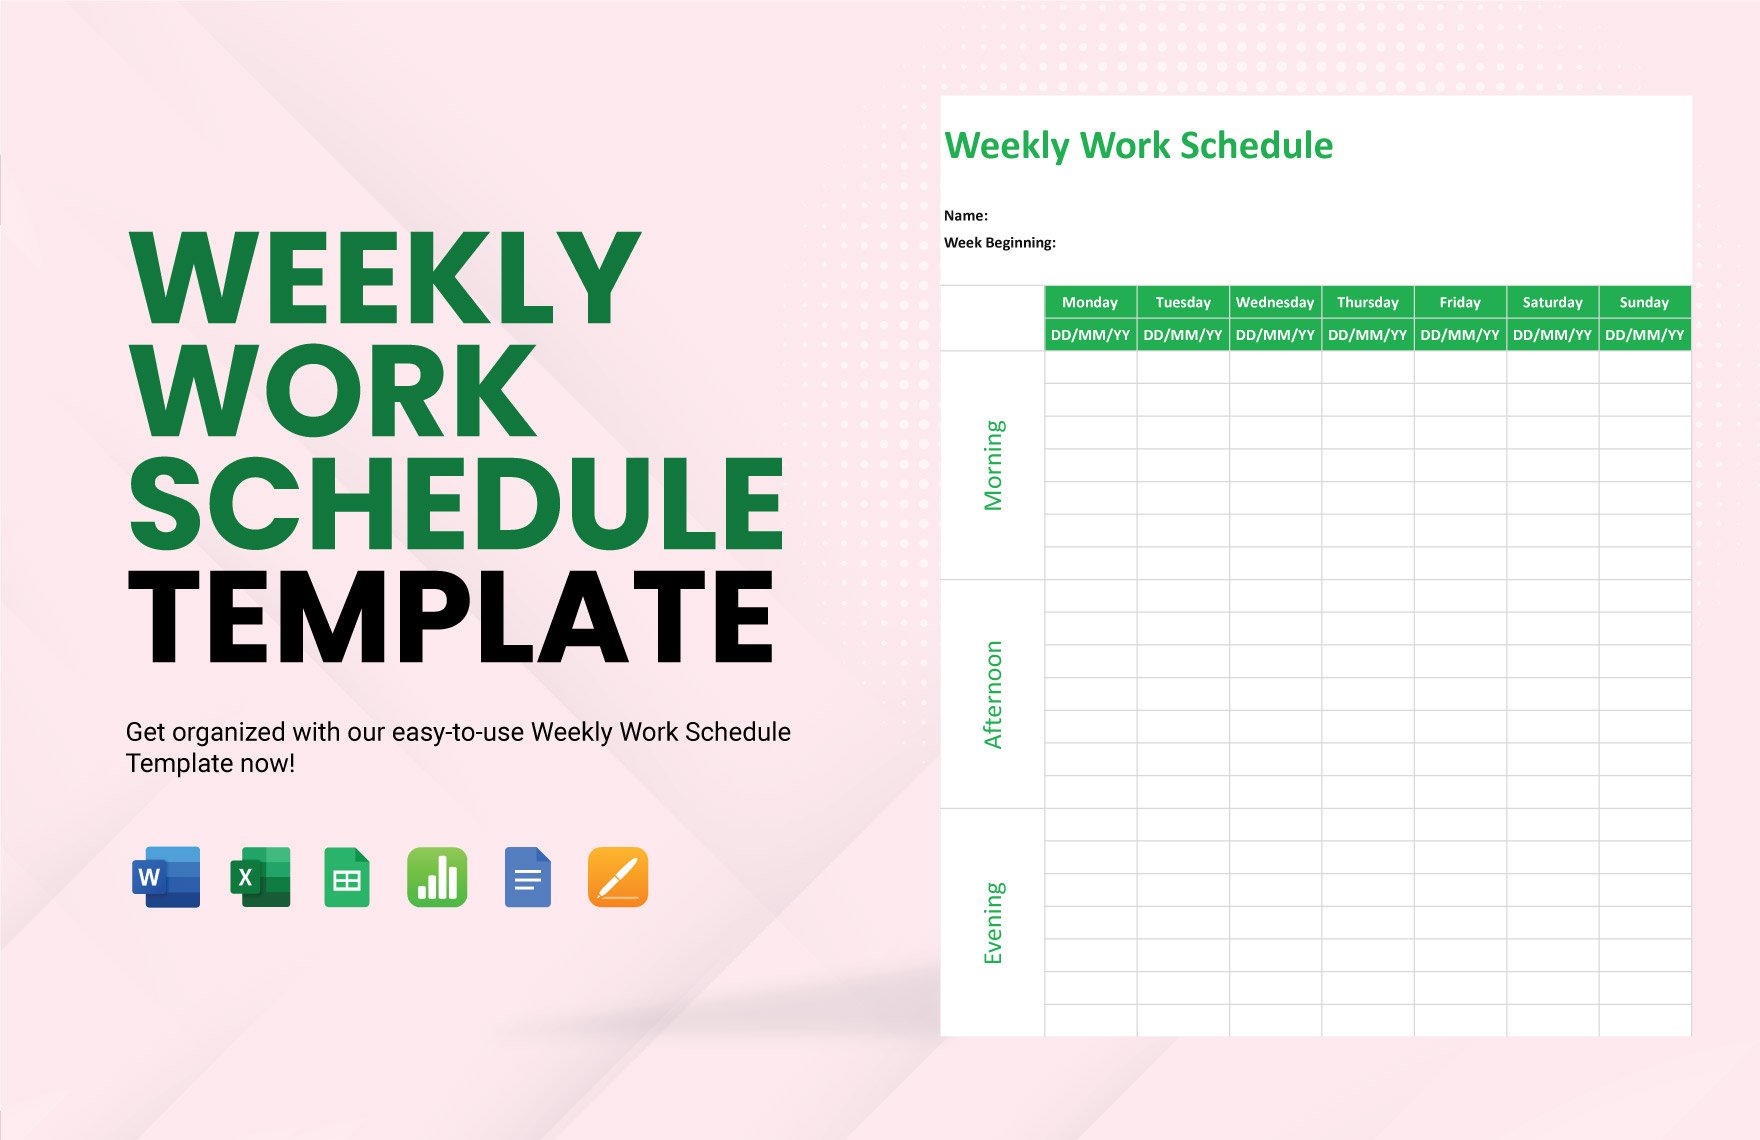 Weekly Work Schedule Template in Word, Google Docs, Excel, Google Sheets, Apple Pages, Apple Numbers